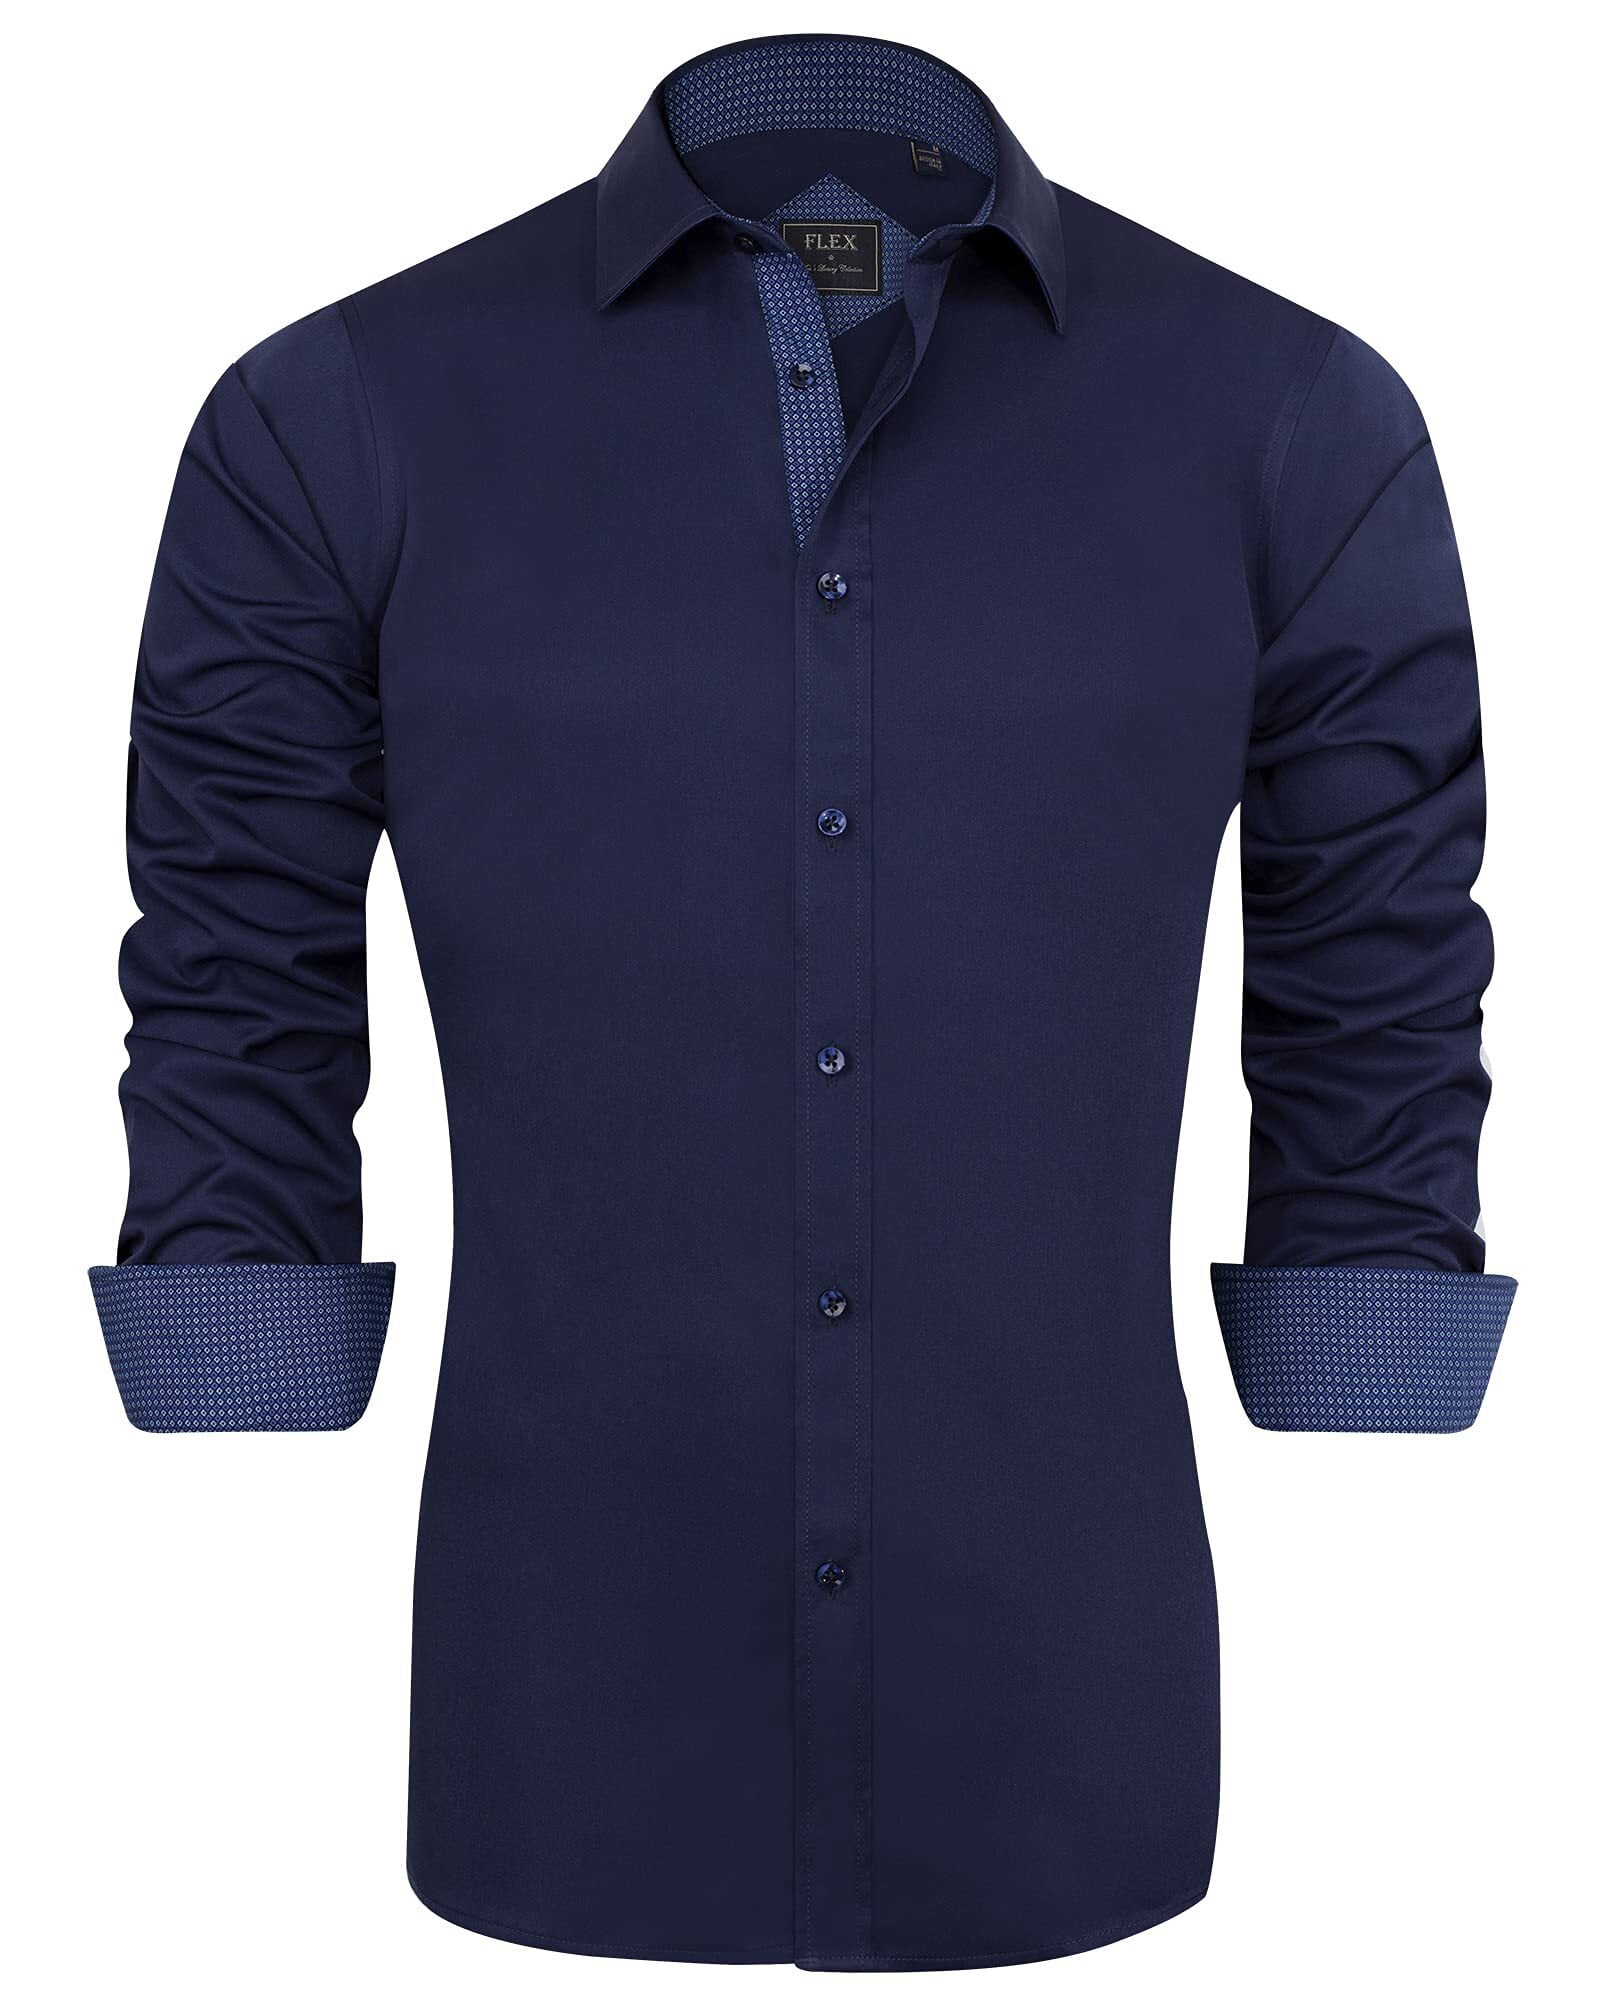 Alimens & Gentle Mens Long Sleeve Stretch Dress Shirts Casual